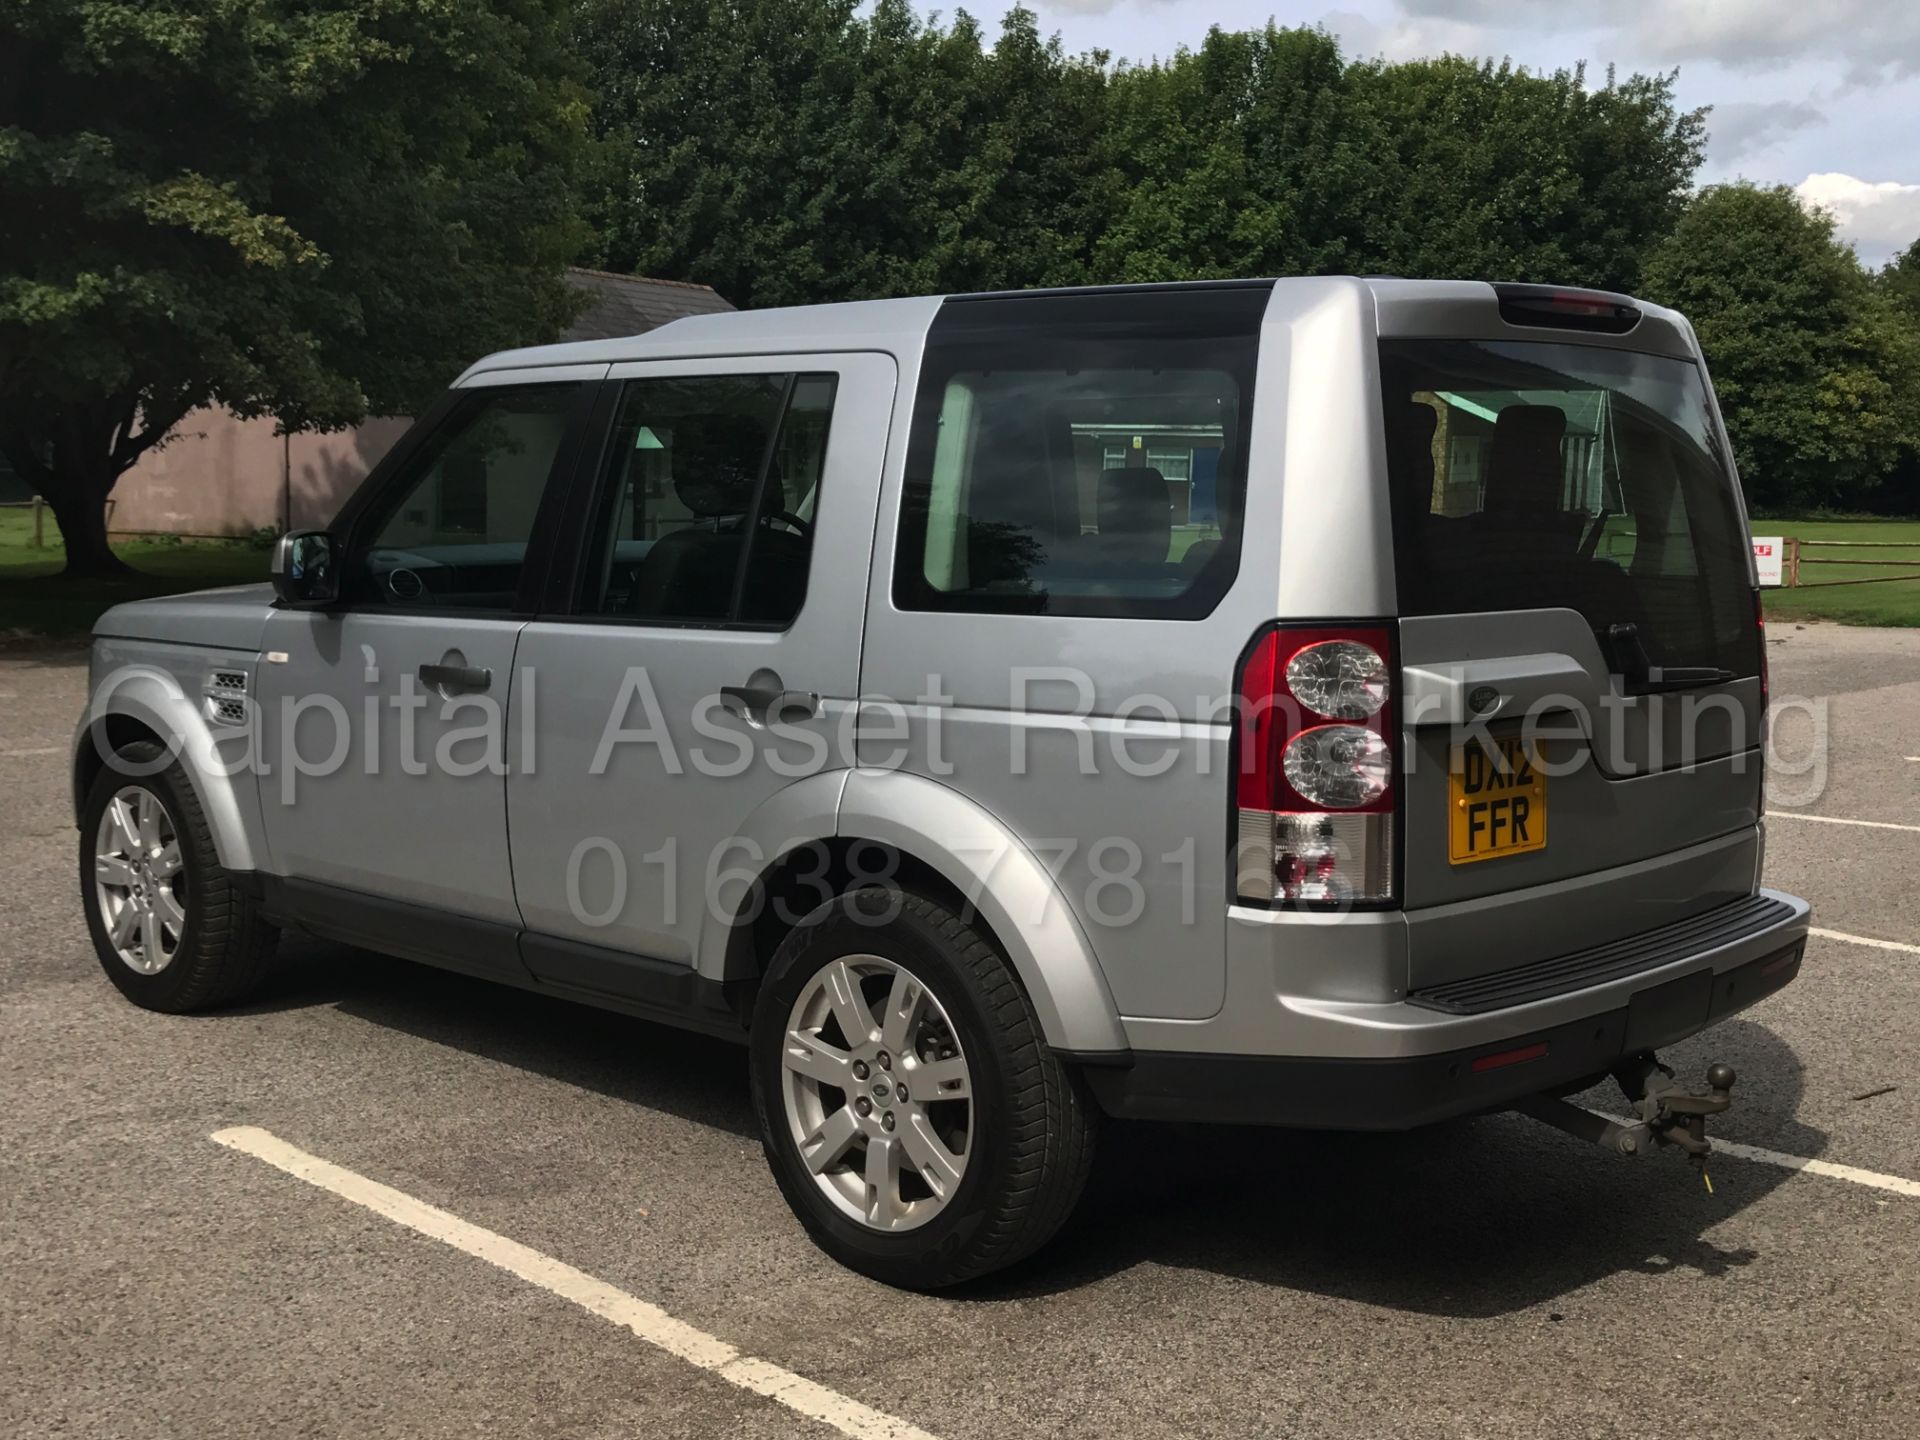 (On Sale) LAND ROVER DISCOVERY 4 (2012) '3.0 SDV6 - 8 SPEED AUTO - 7 SEATER' **HUGE SPEC** (1 OWNER) - Image 7 of 33